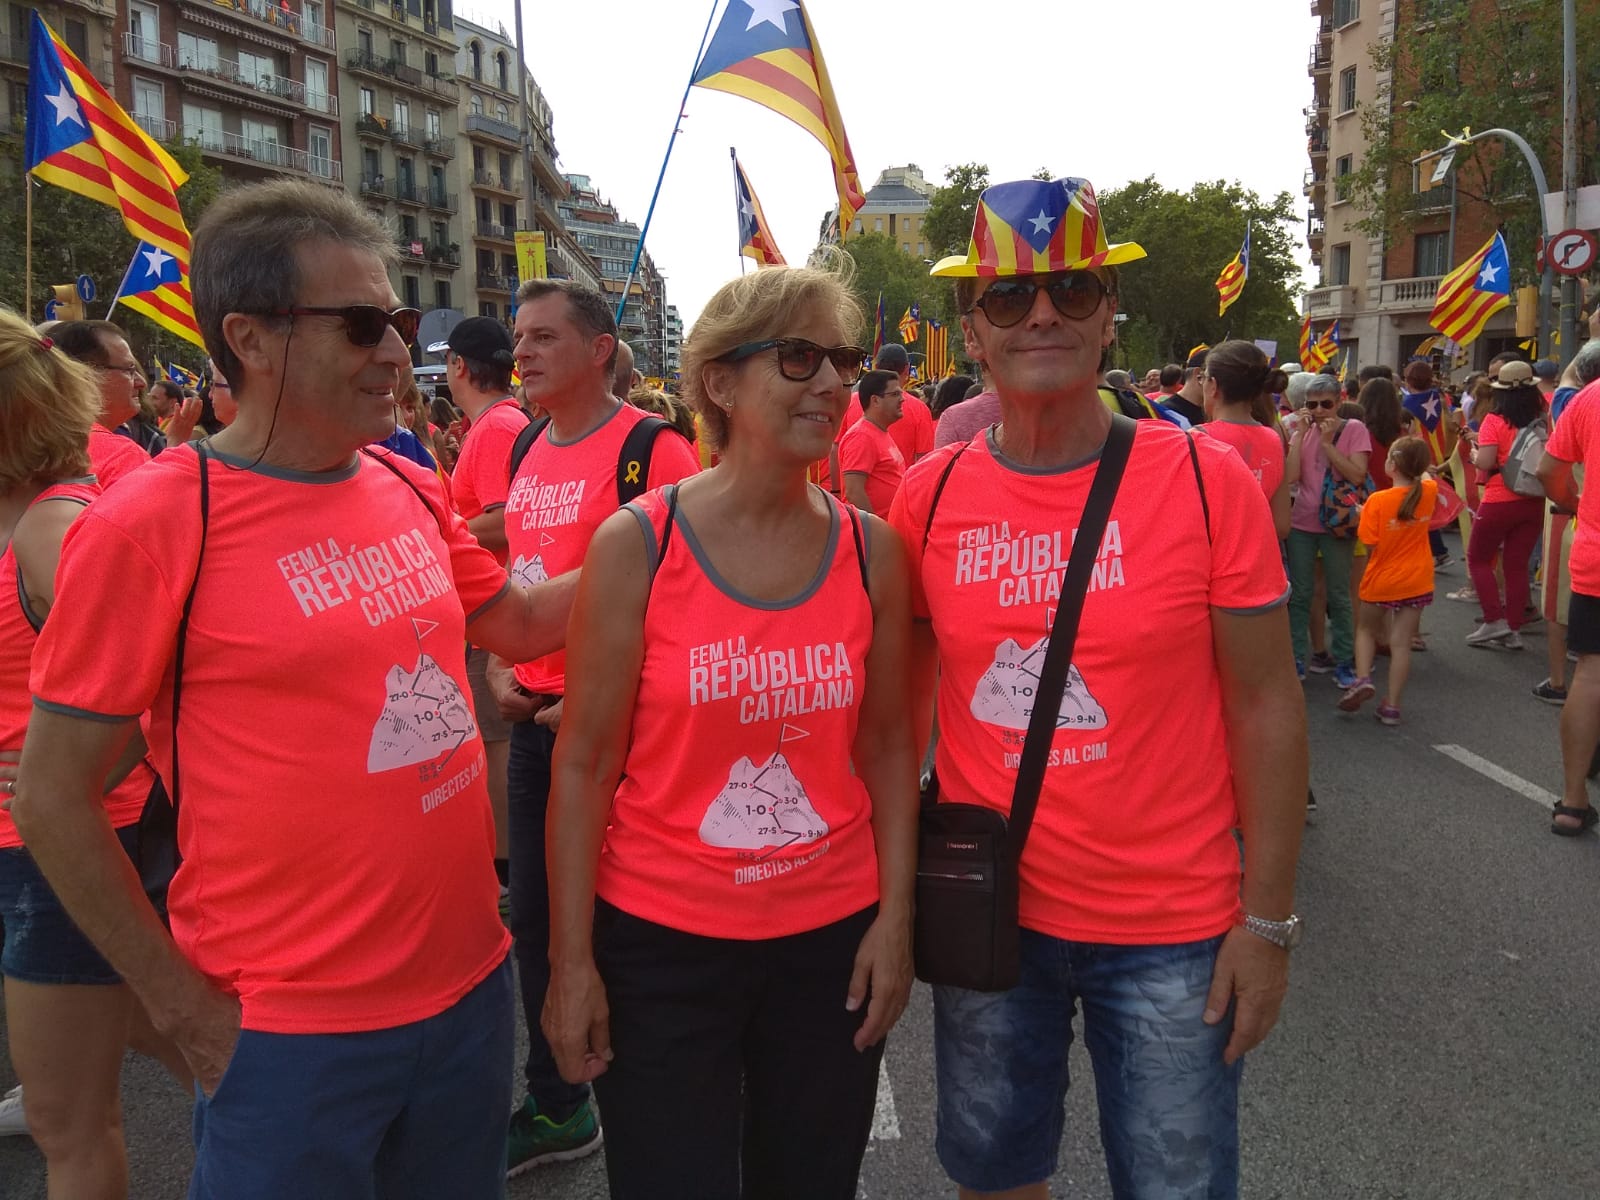 Catalonian Independence: A Critically Misrepresented Struggle of Identity 